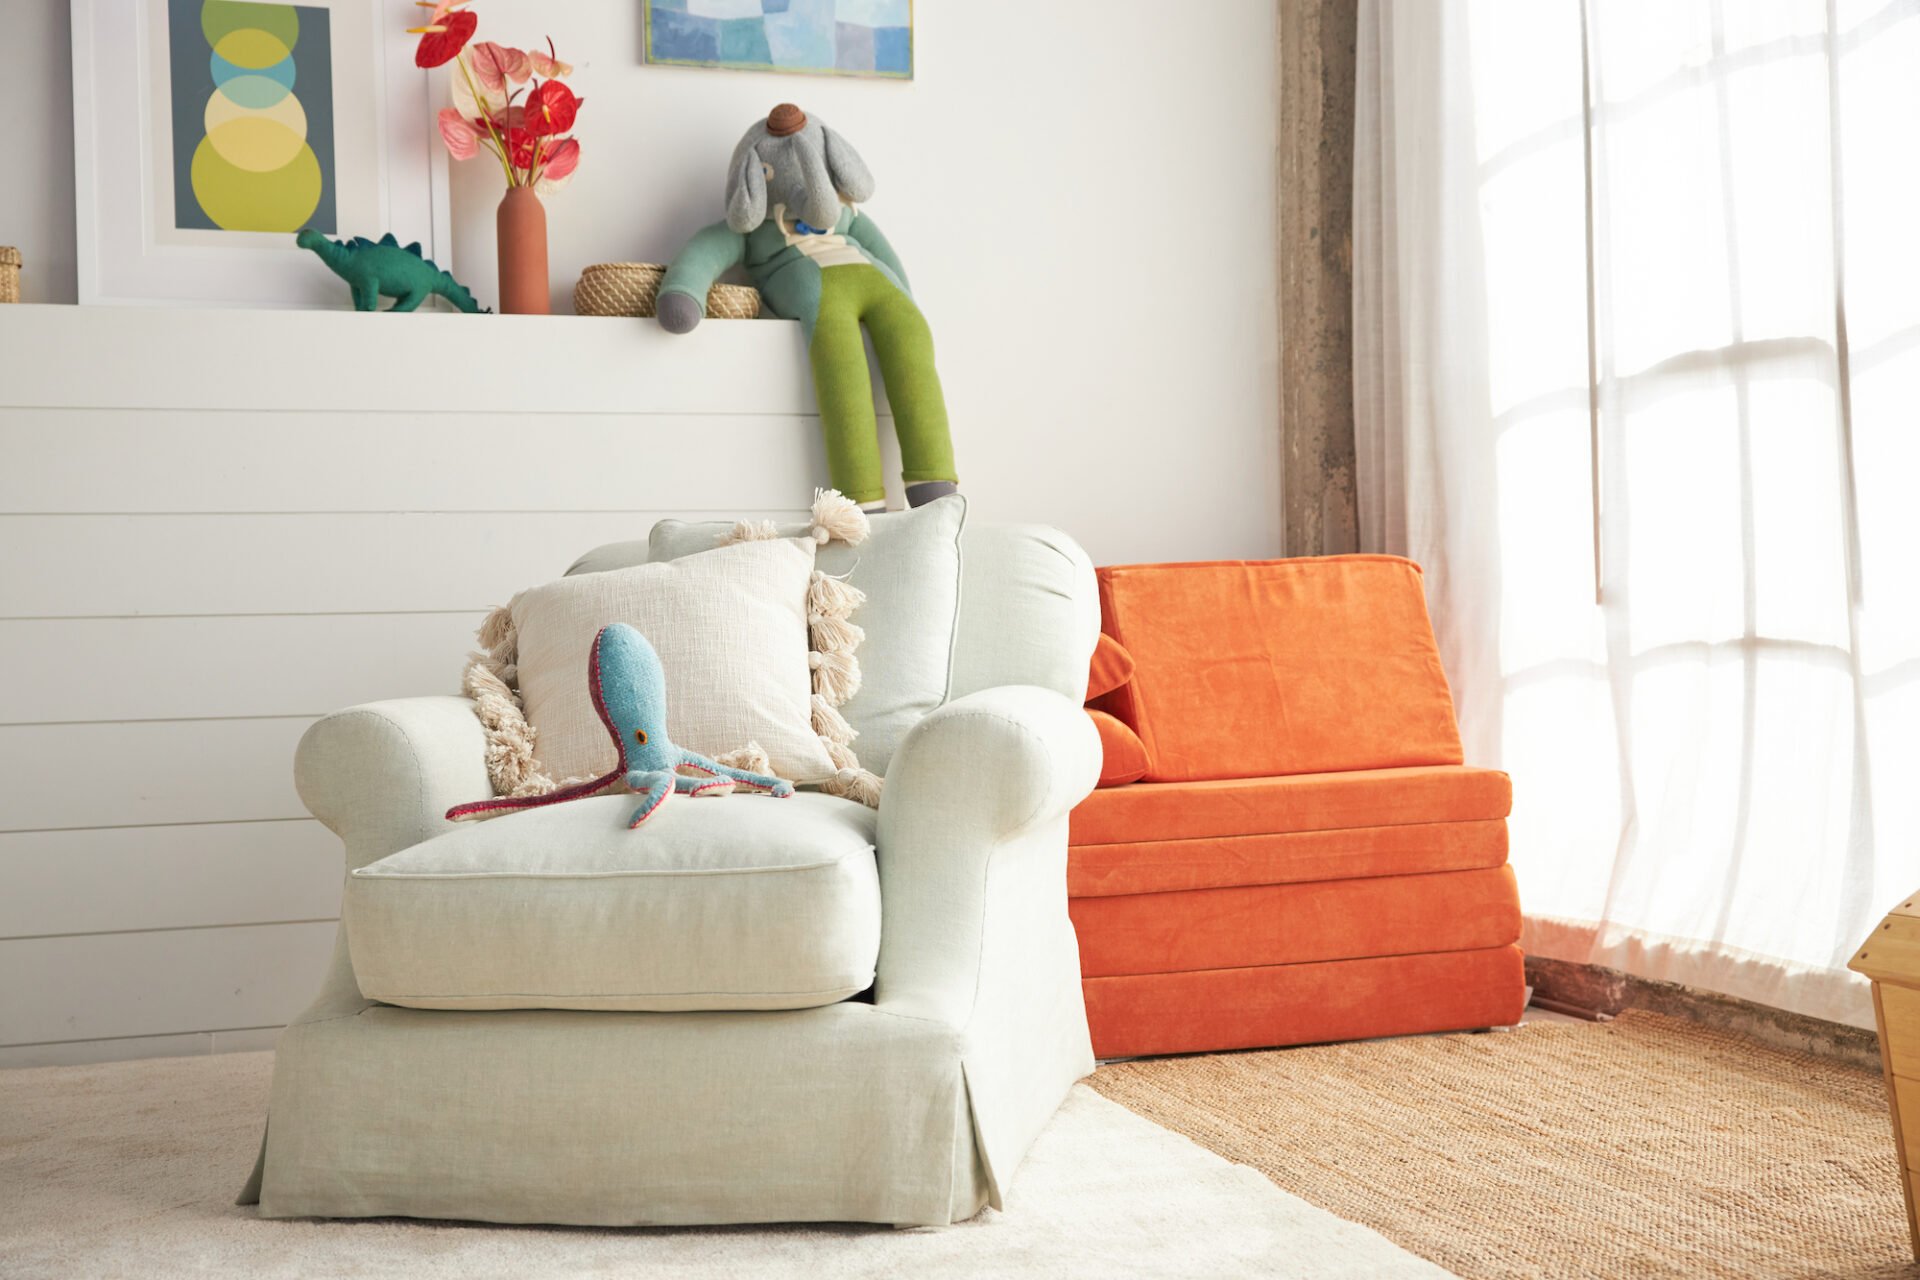 orange foam modular play couch behind white couch